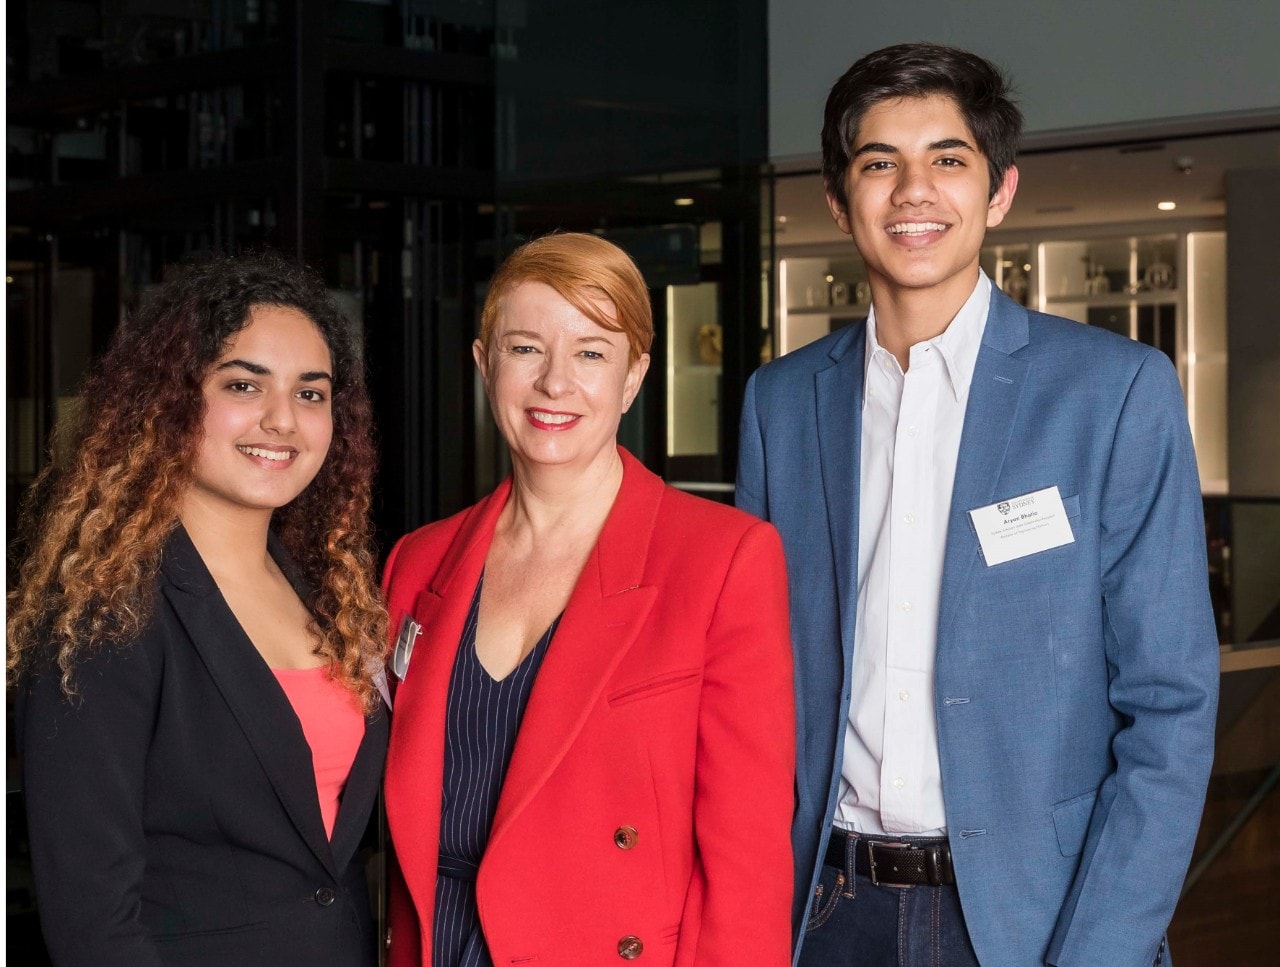 Scholarship recepients Madhullikaa Singh and Aryan Bhatia with University of Sydney Vice-Principal (External Relations) Tania Rhodes-Taylor